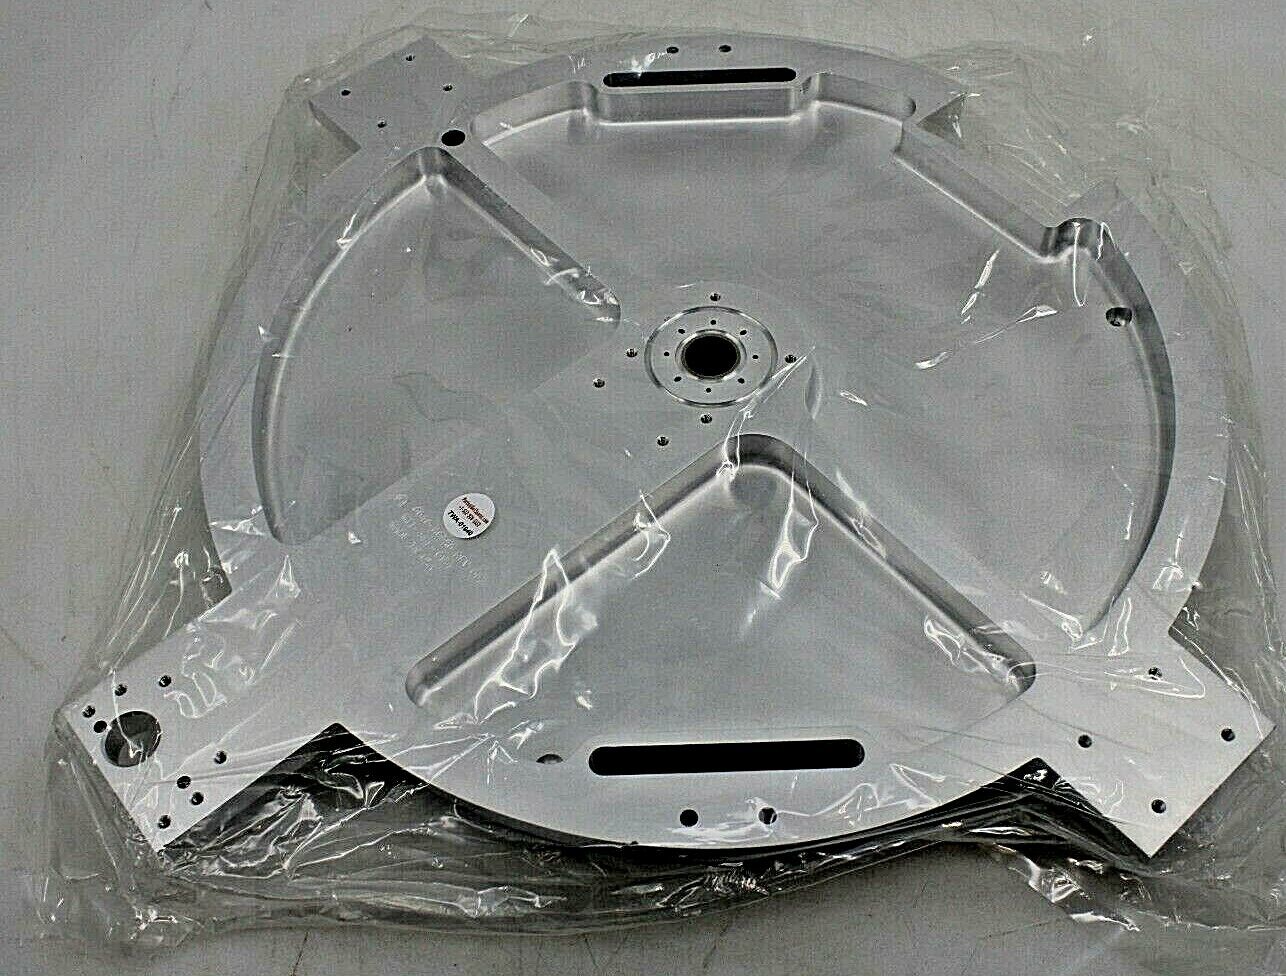 0040-60980 / LID SGD SHOWER HEAD 300MM EMAX CHAMBER LID / APPLIED MATERIALS  AMAT